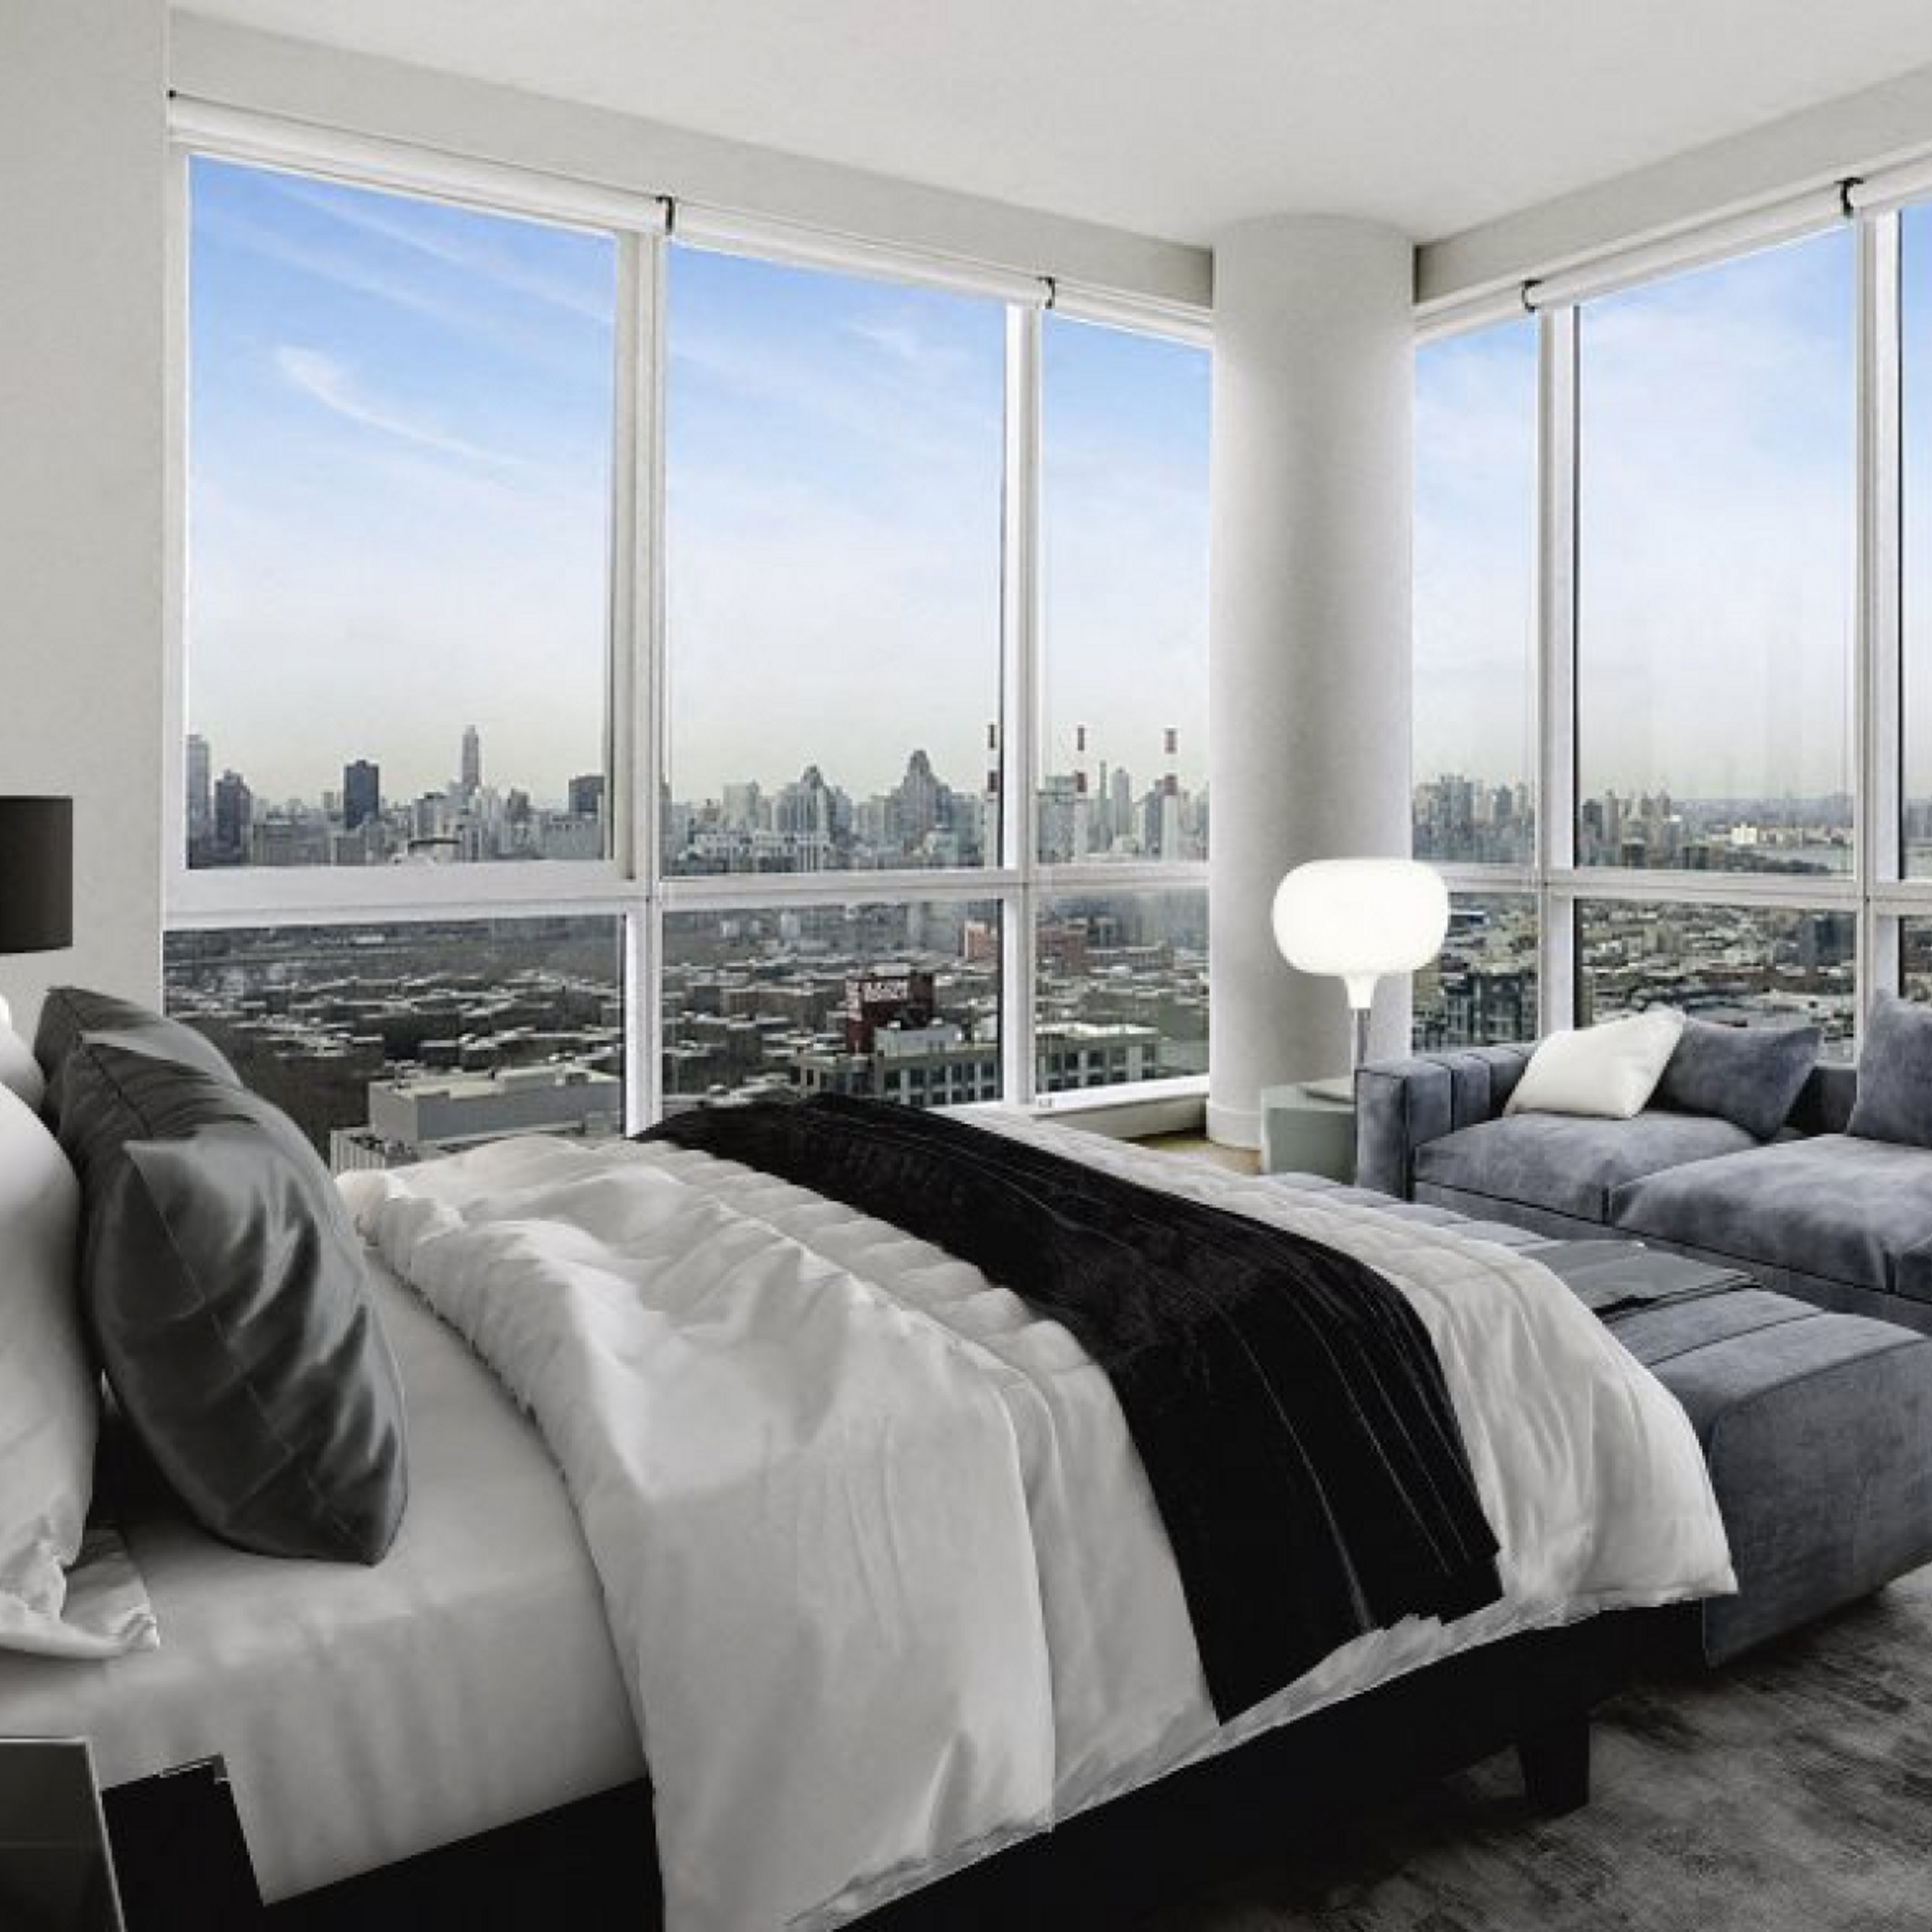 Bedroom area with view of the city